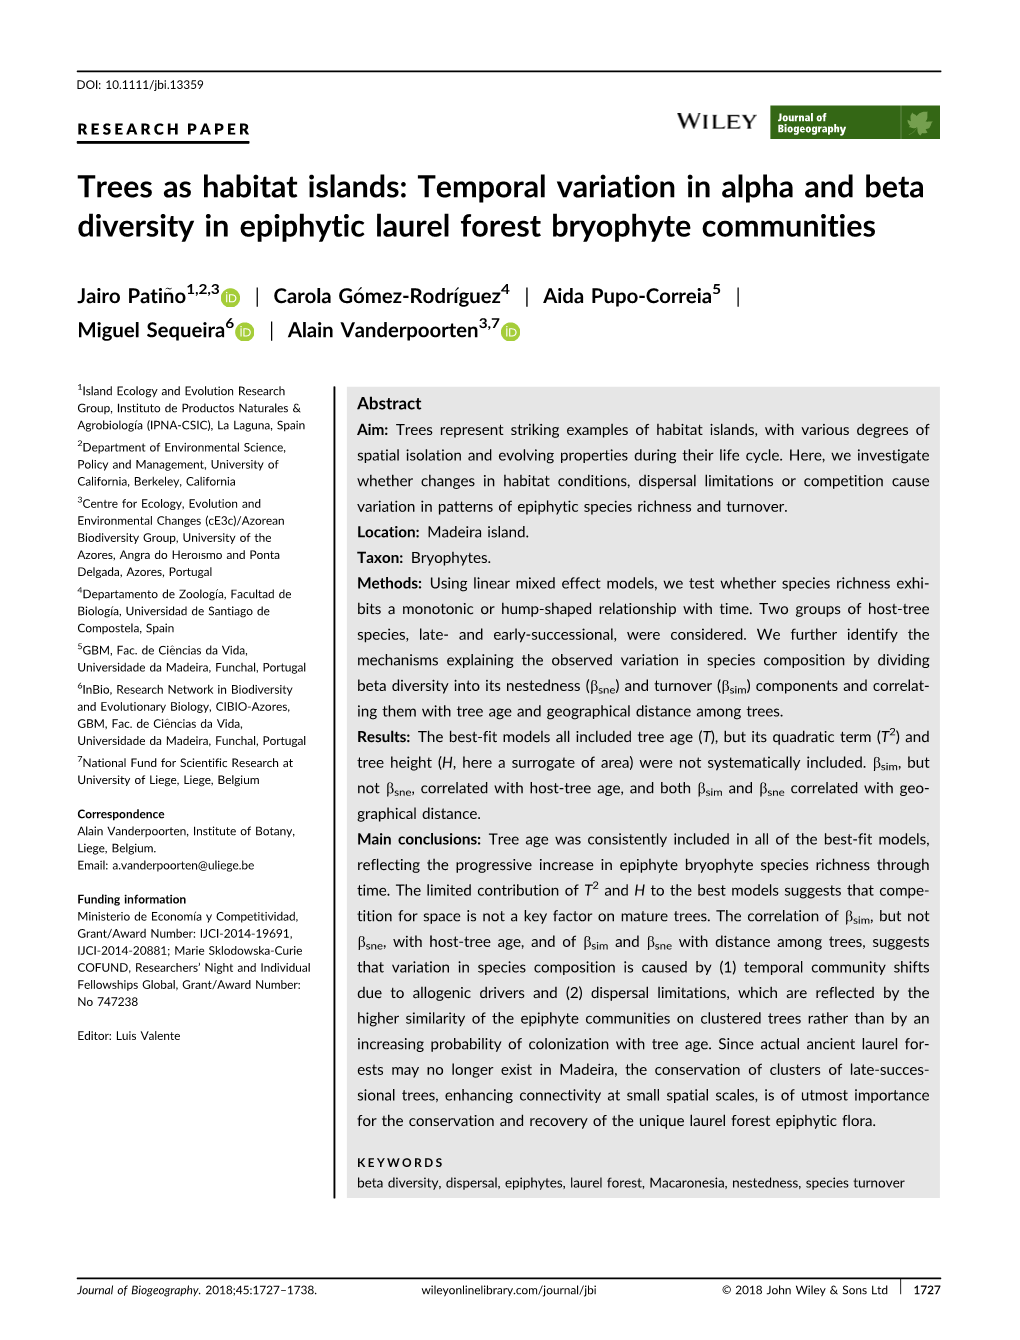 Trees As Habitat Islands: Temporal Variation in Alpha and Beta Diversity in Epiphytic Laurel Forest Bryophyte Communities